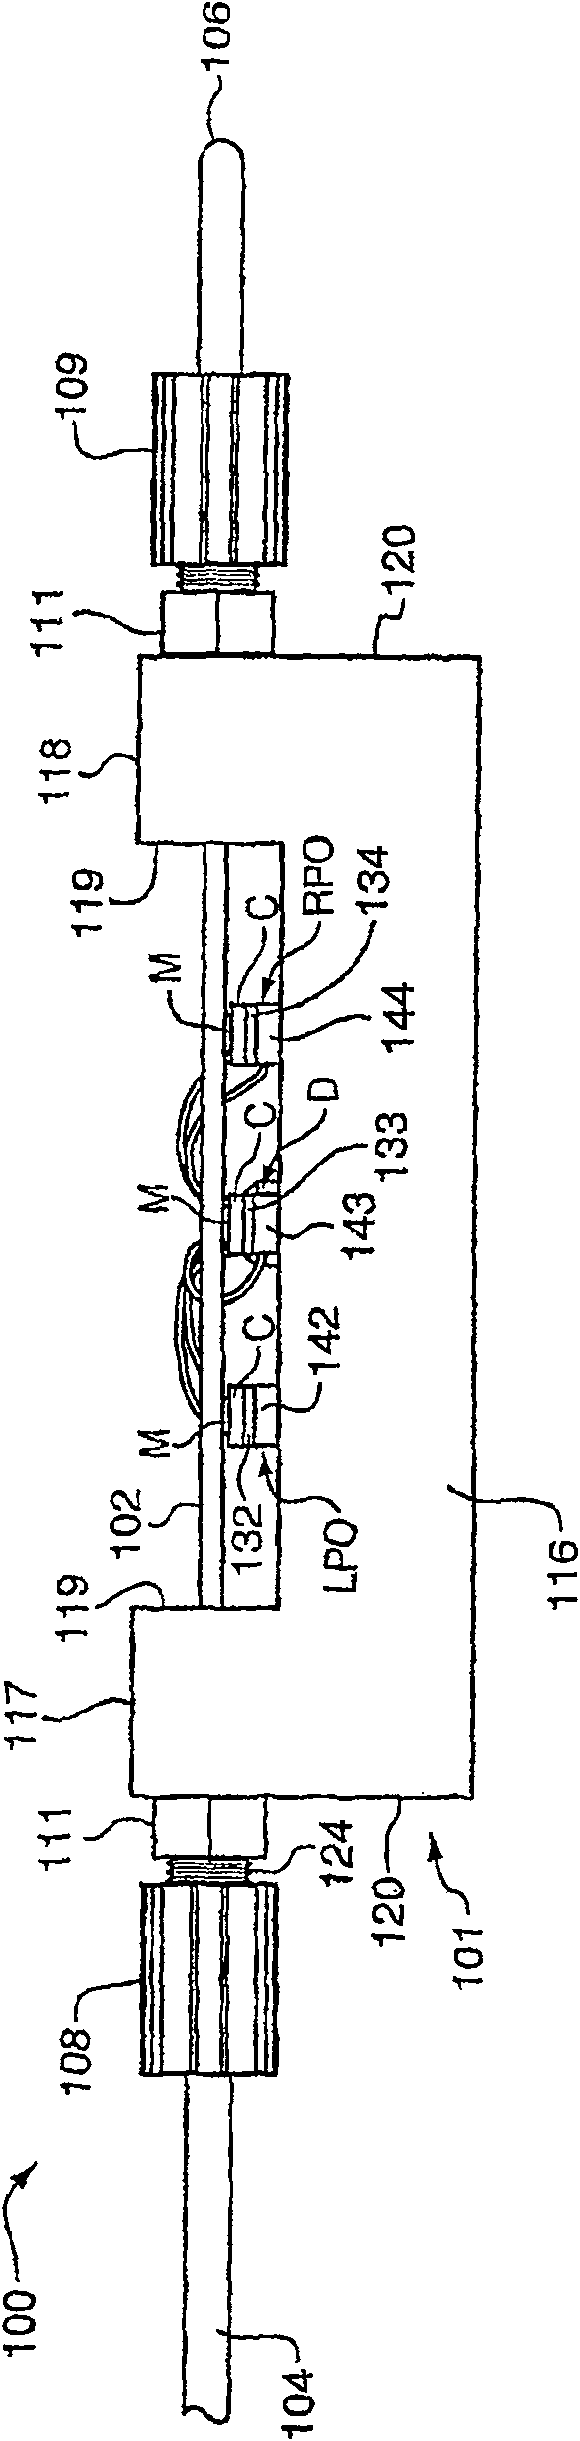 Compensation method and apparatus for a Coriolis flow meter